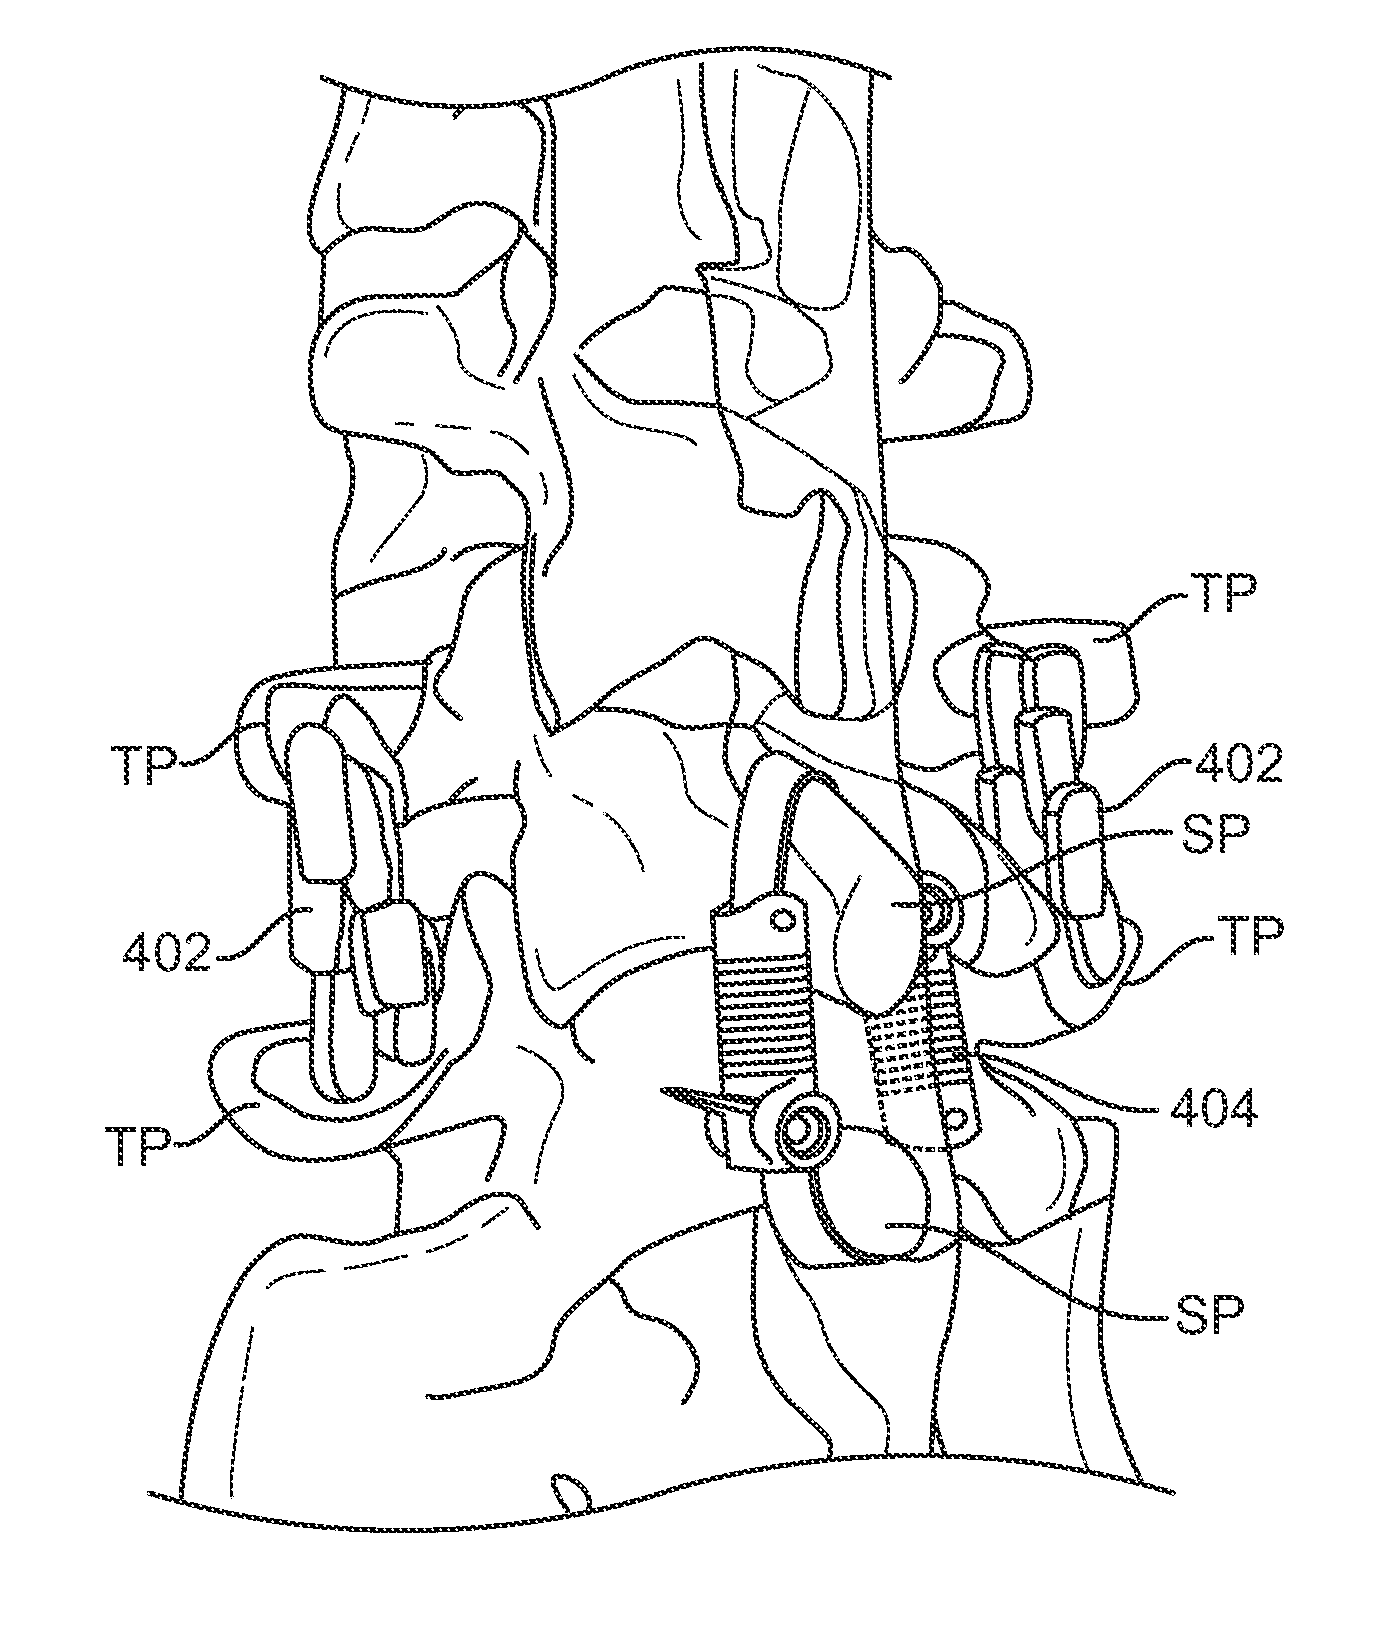 Surgical tether apparatus and methods of use